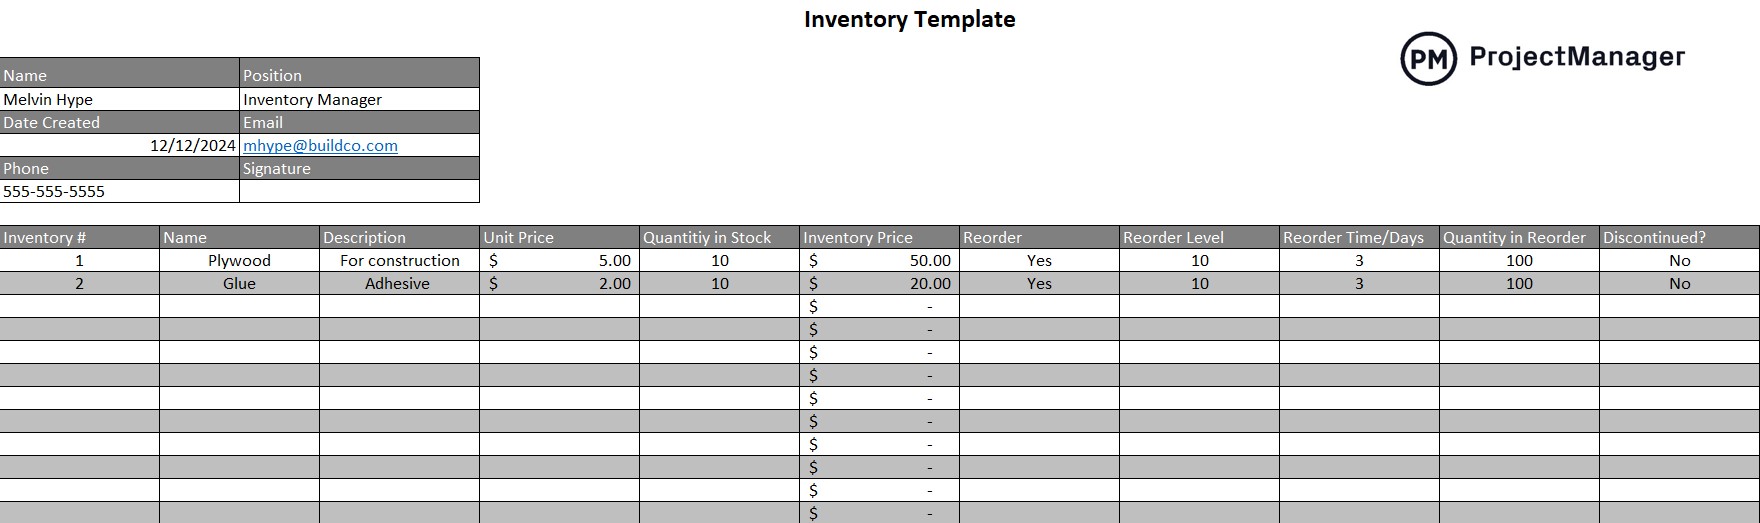 Inventory template for tracking inventory during the production process